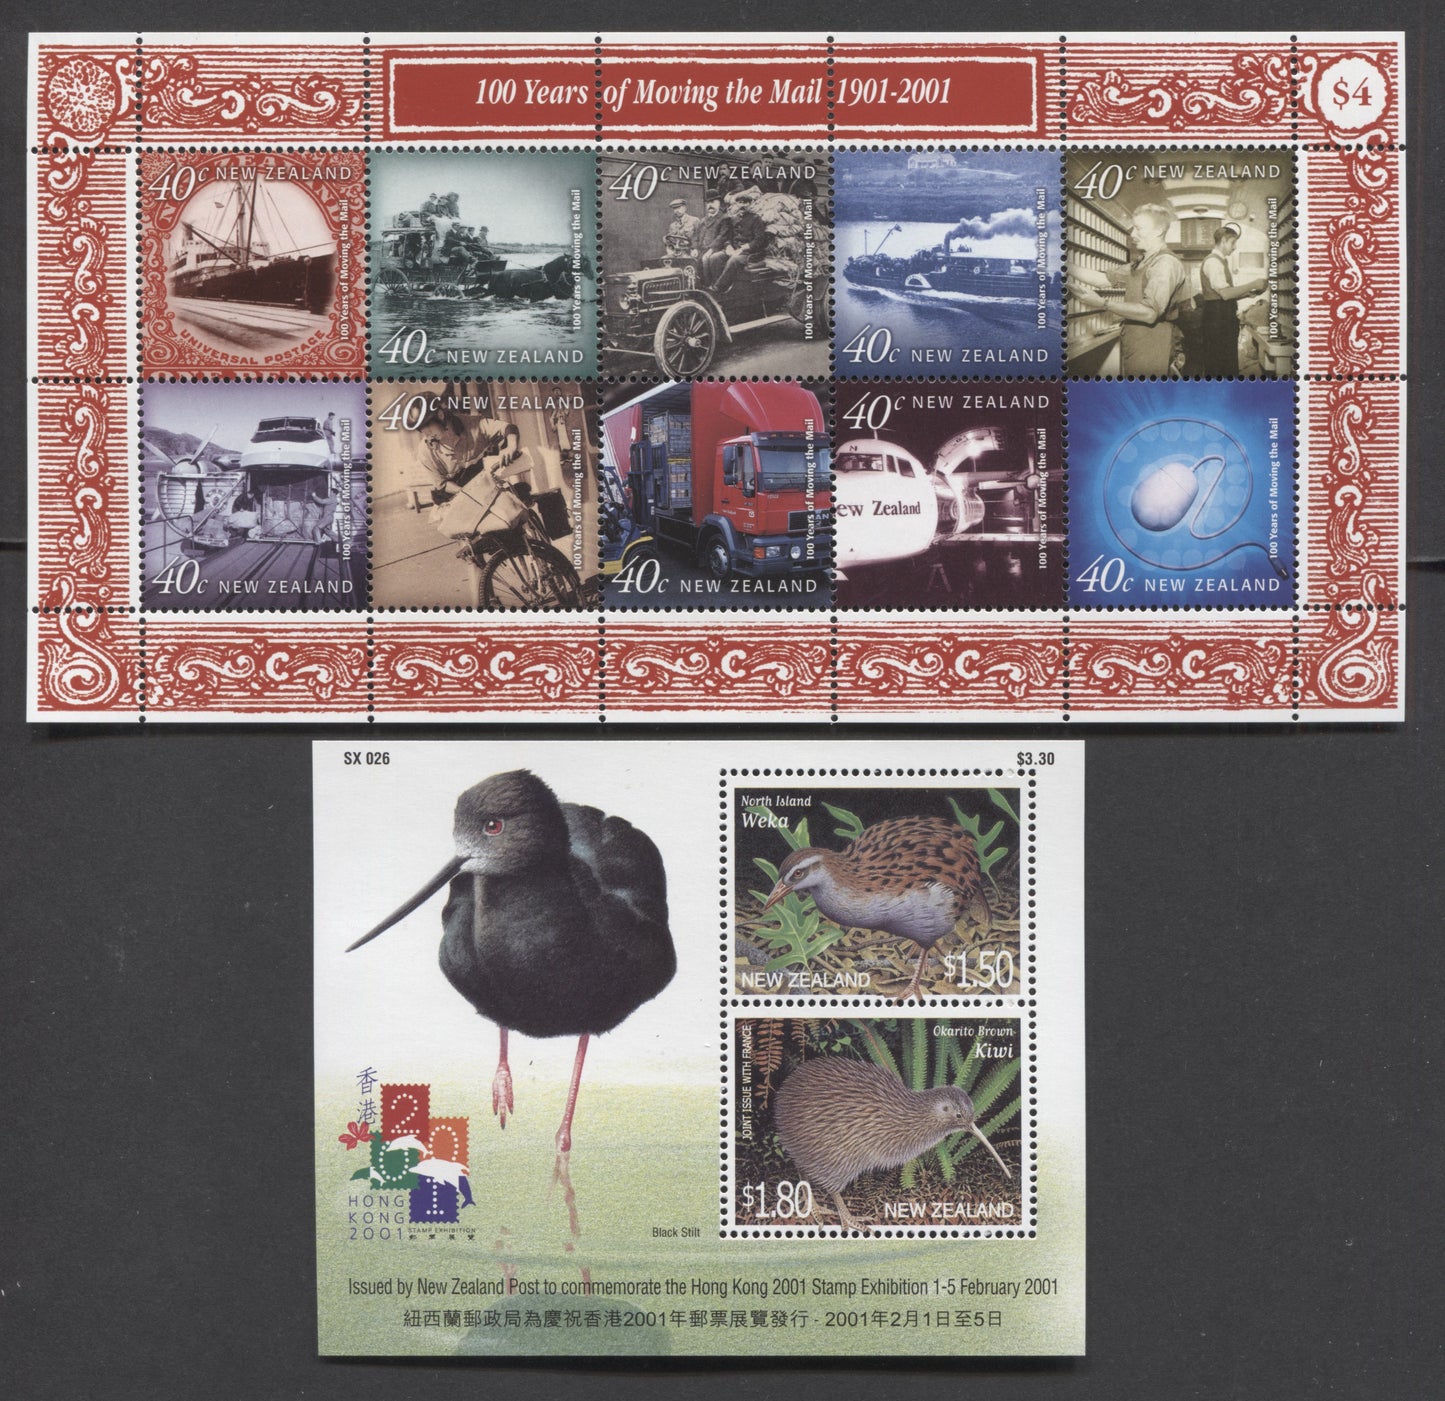 Lot 138 New Zealand SC#1662a/1701a 2000-2001 Commemoratives, A VFNH Range Of Souvenir Sheets, 2017 Scott Cat. $23.25 USD, Click on Listing to See ALL Pictures